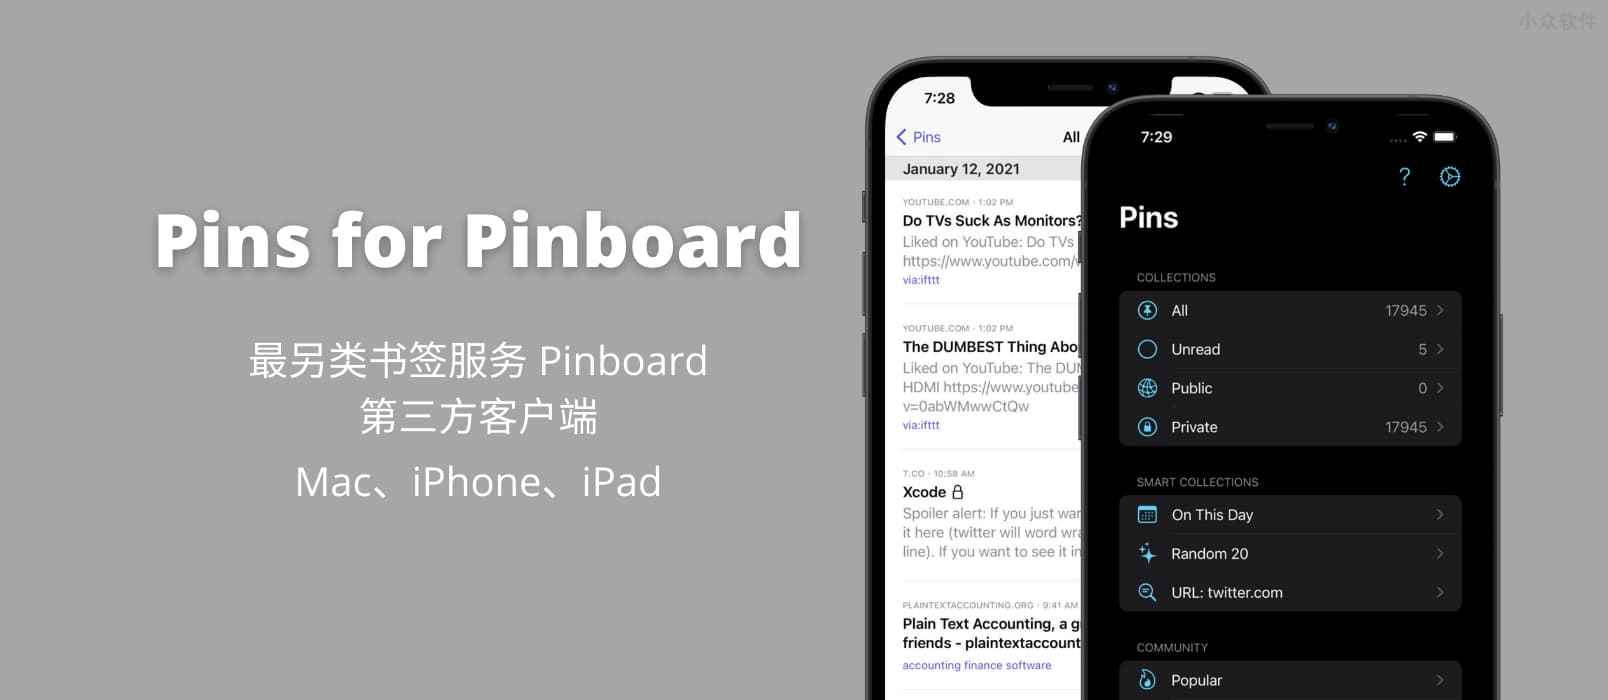 Pins for Pinboard - 现代化、功能完善的书签服务 Pinboard 第三方客户端[macOS/iOS]